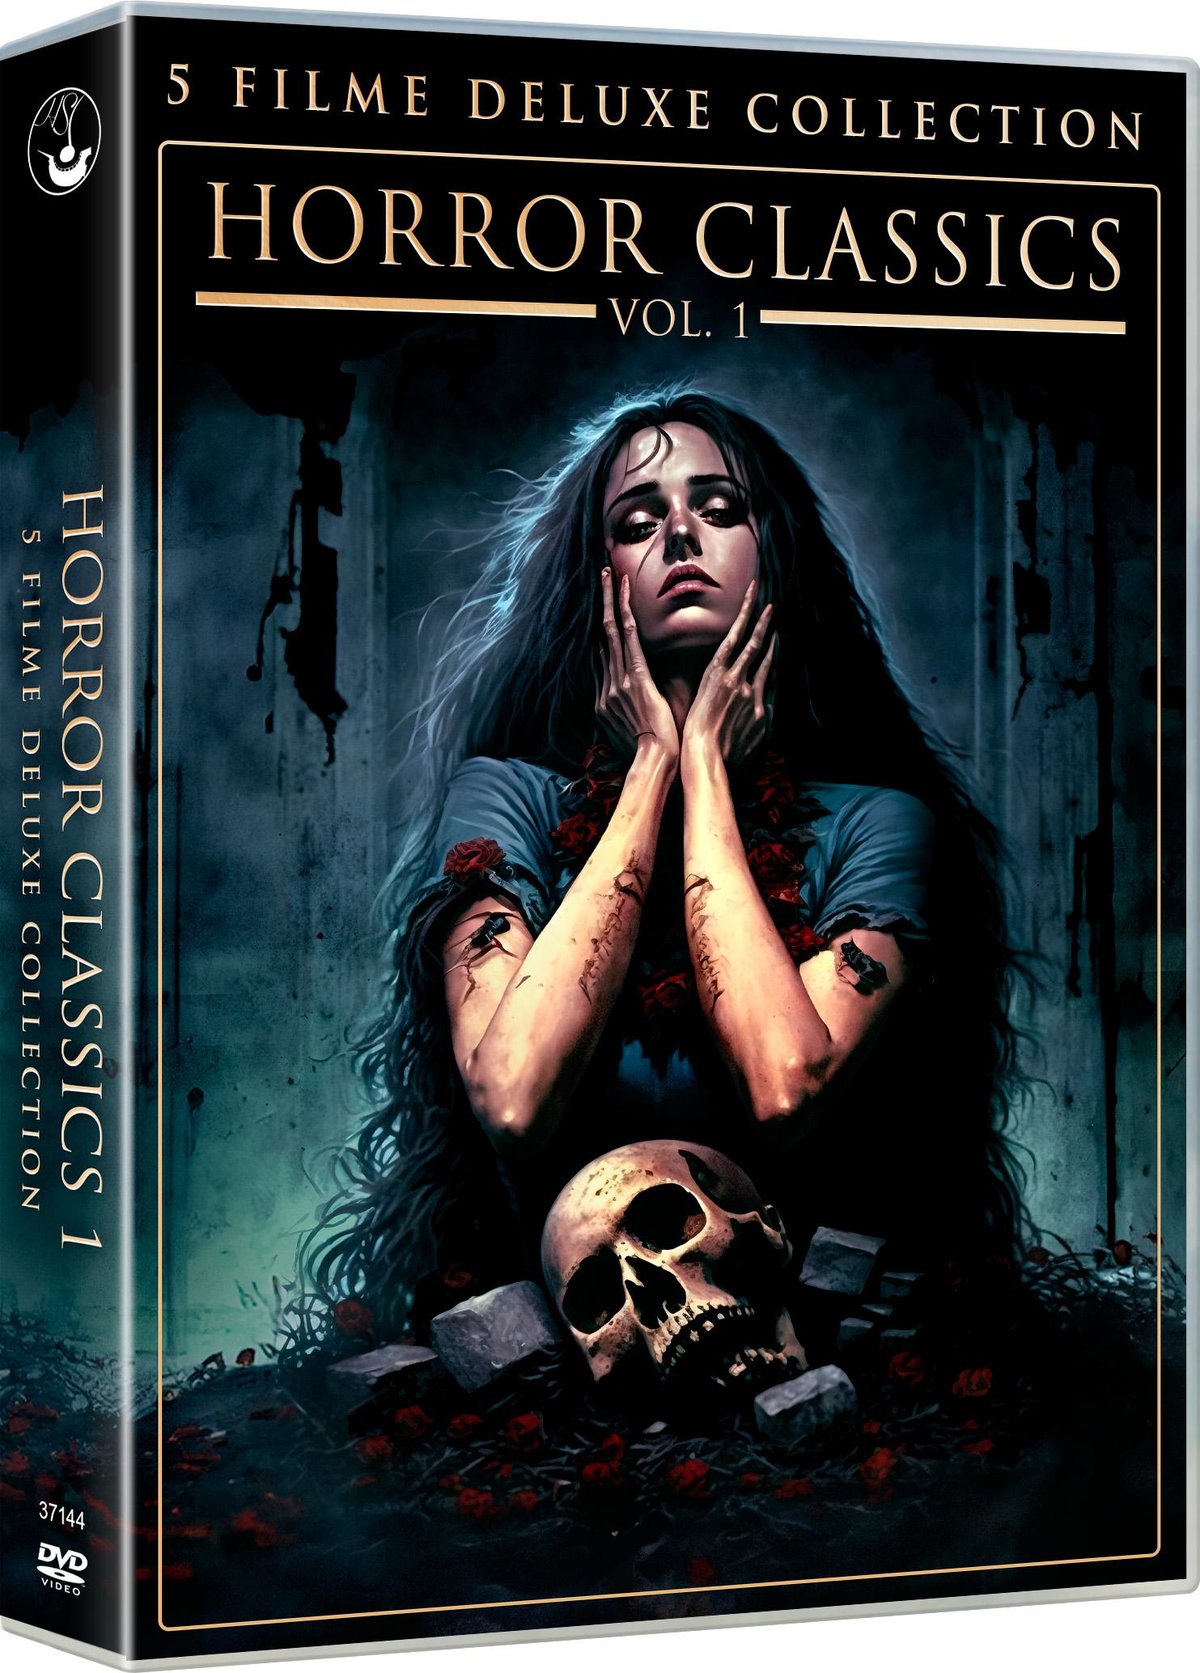 Horror Classics Vol. 1 - Deluxe Collection  [5 DVDs]  (DVD)